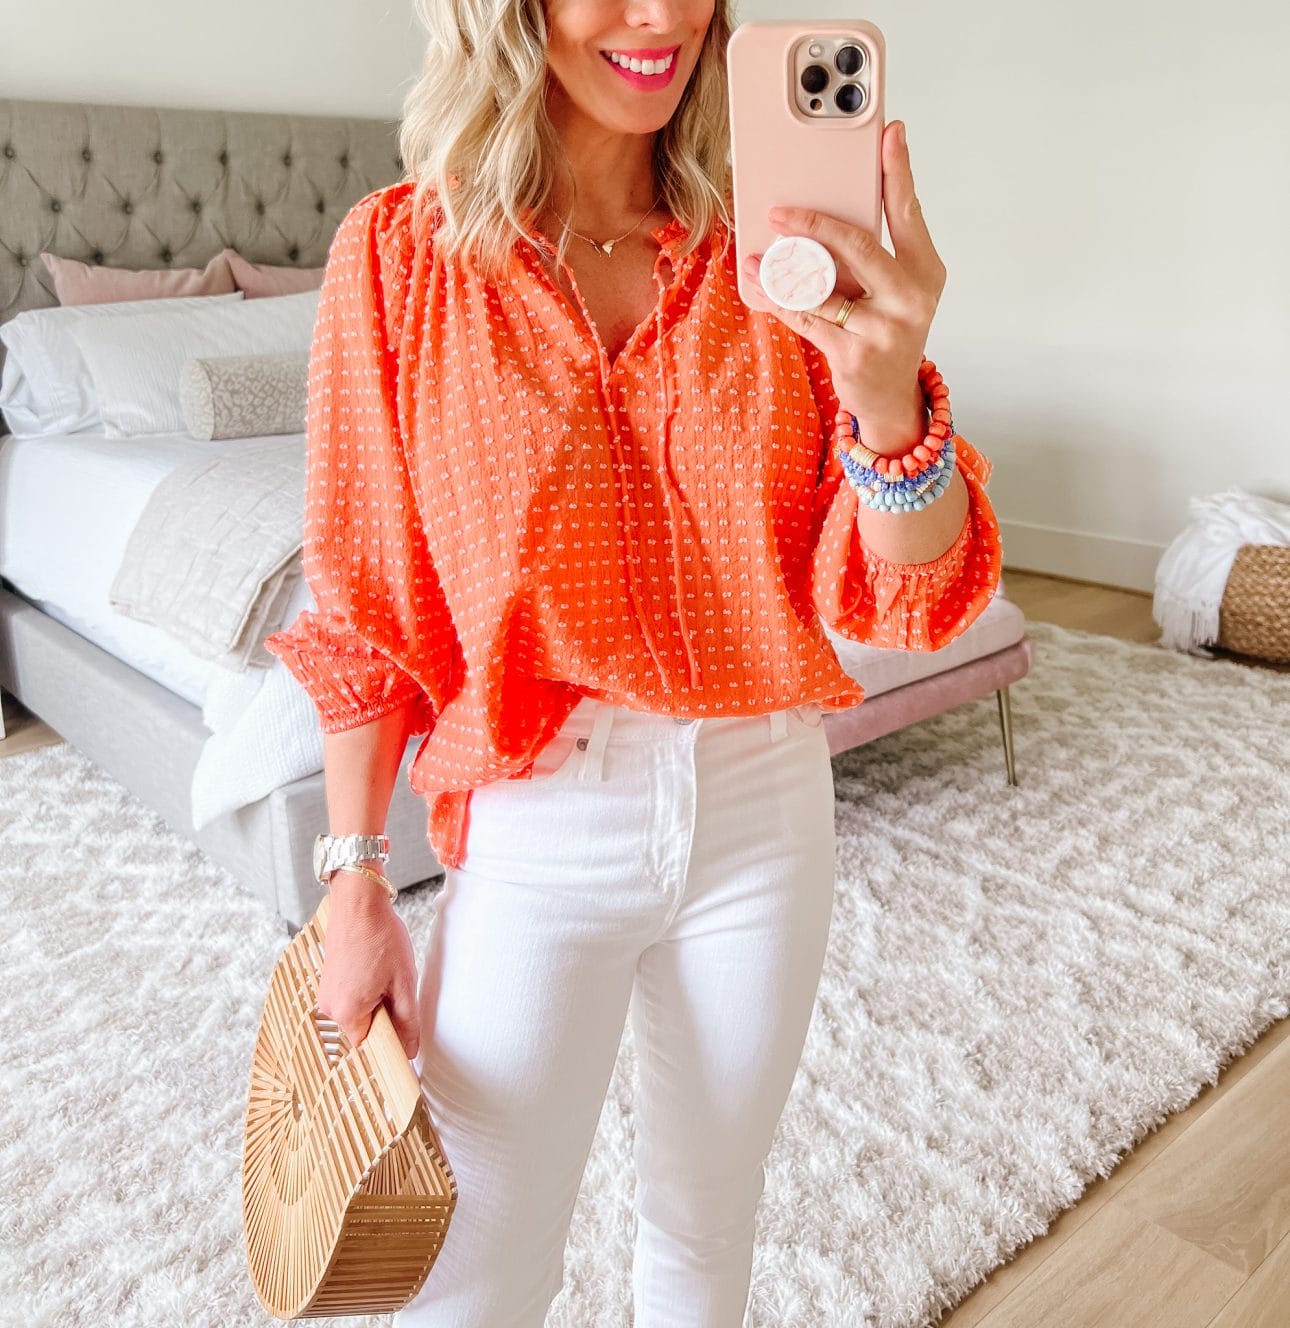 Clip Dot Top, White Jeans, Bamboo Clutch 